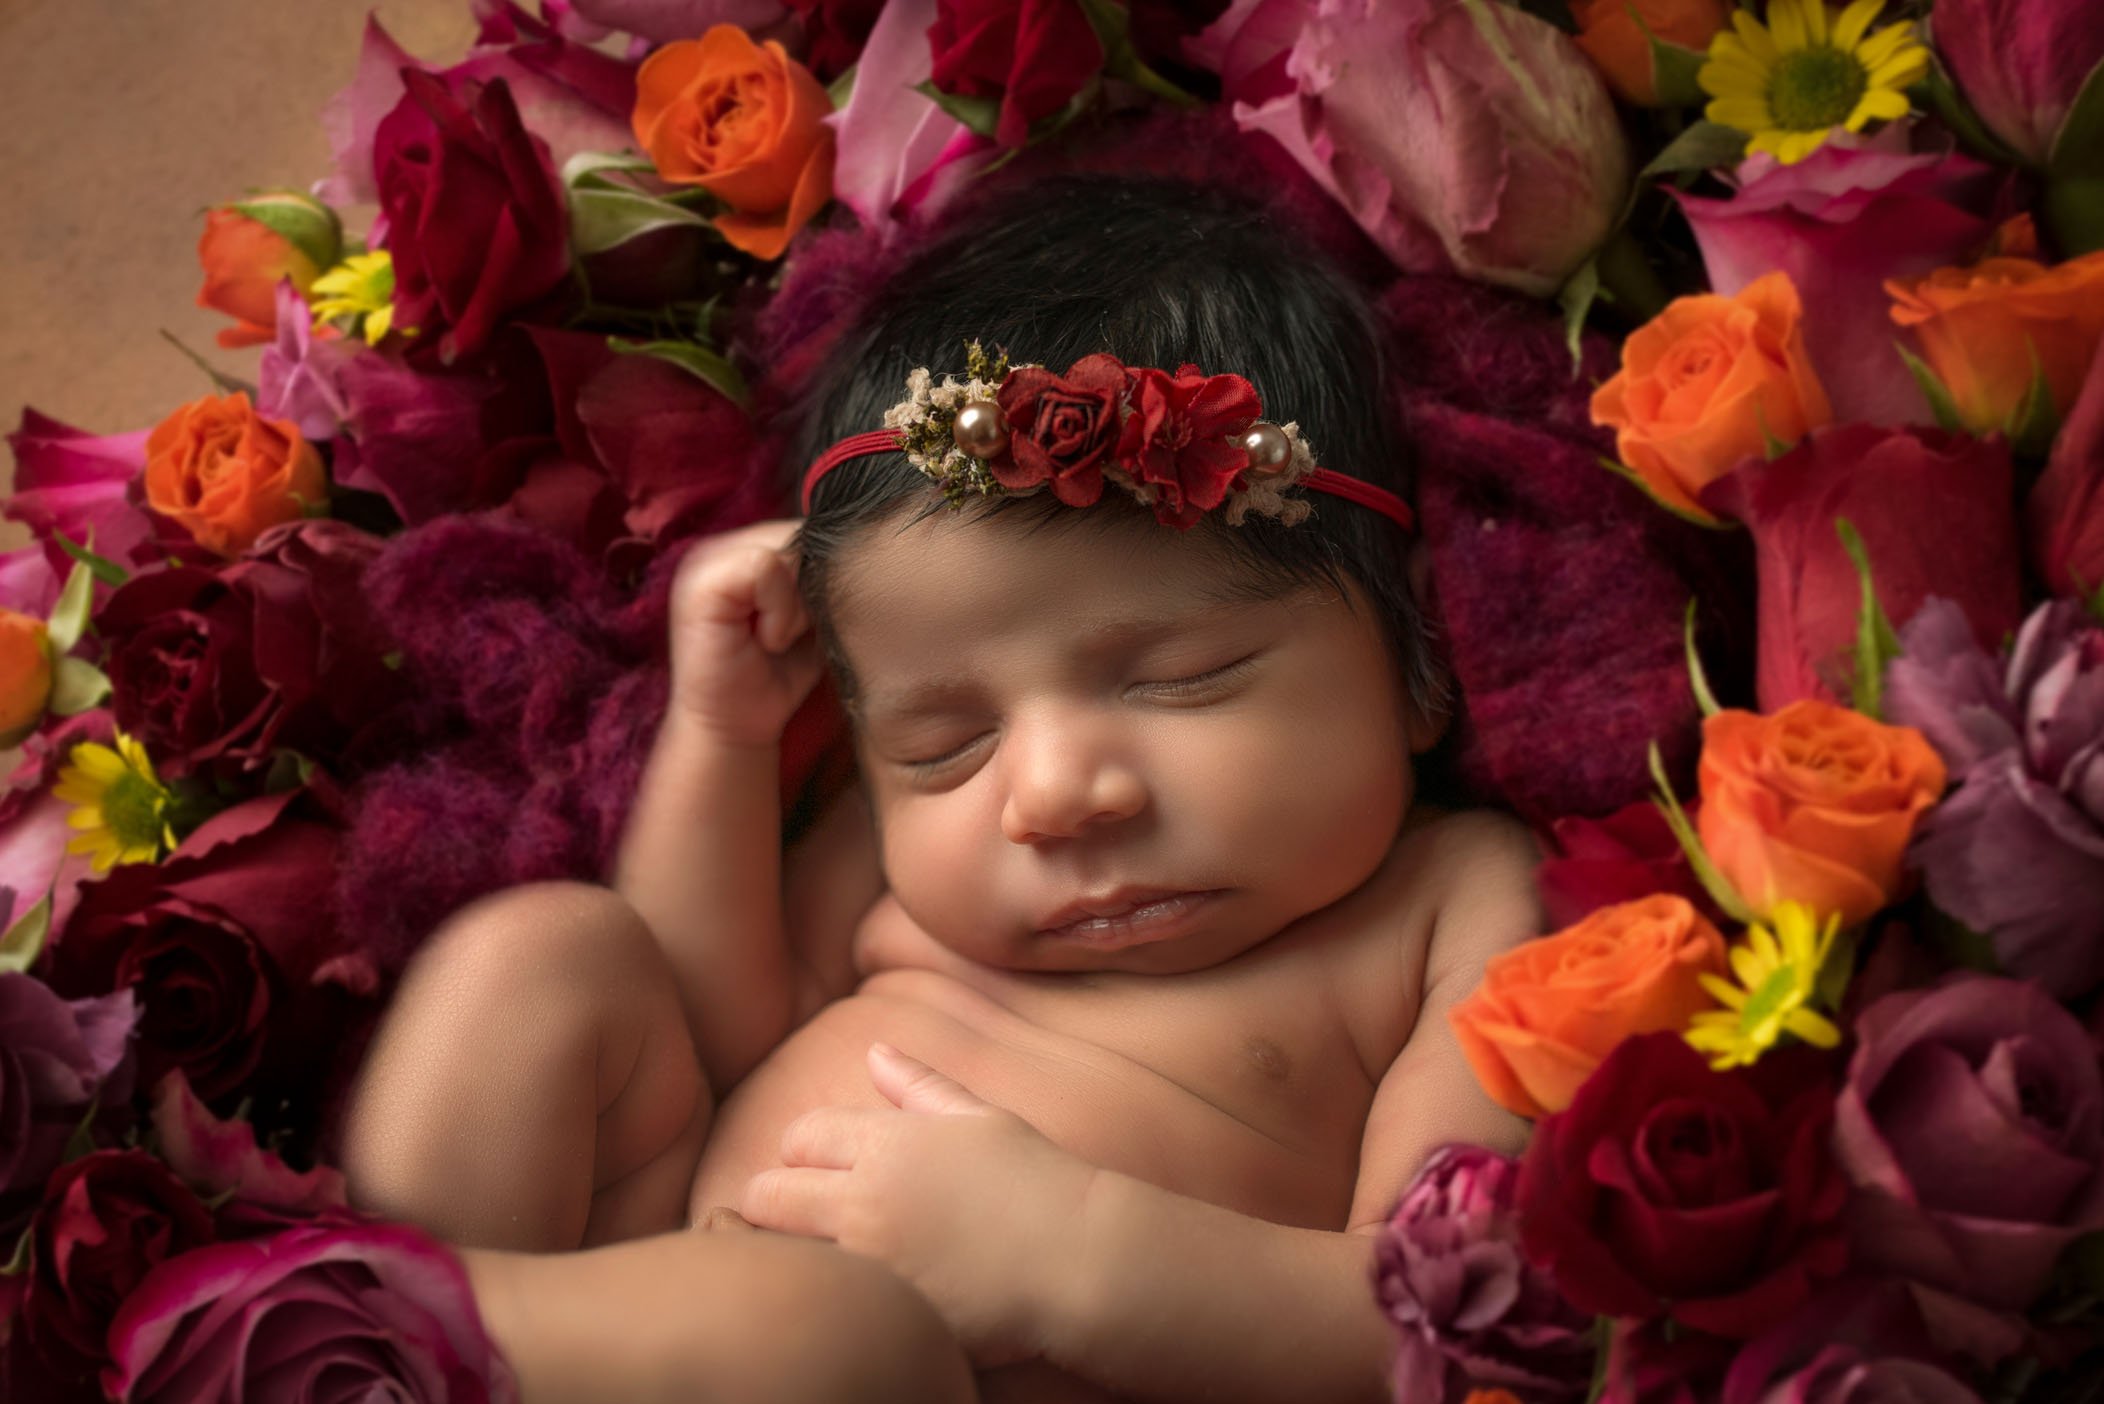 close up of newborn baby girl sleeping in bed of red and orange roses